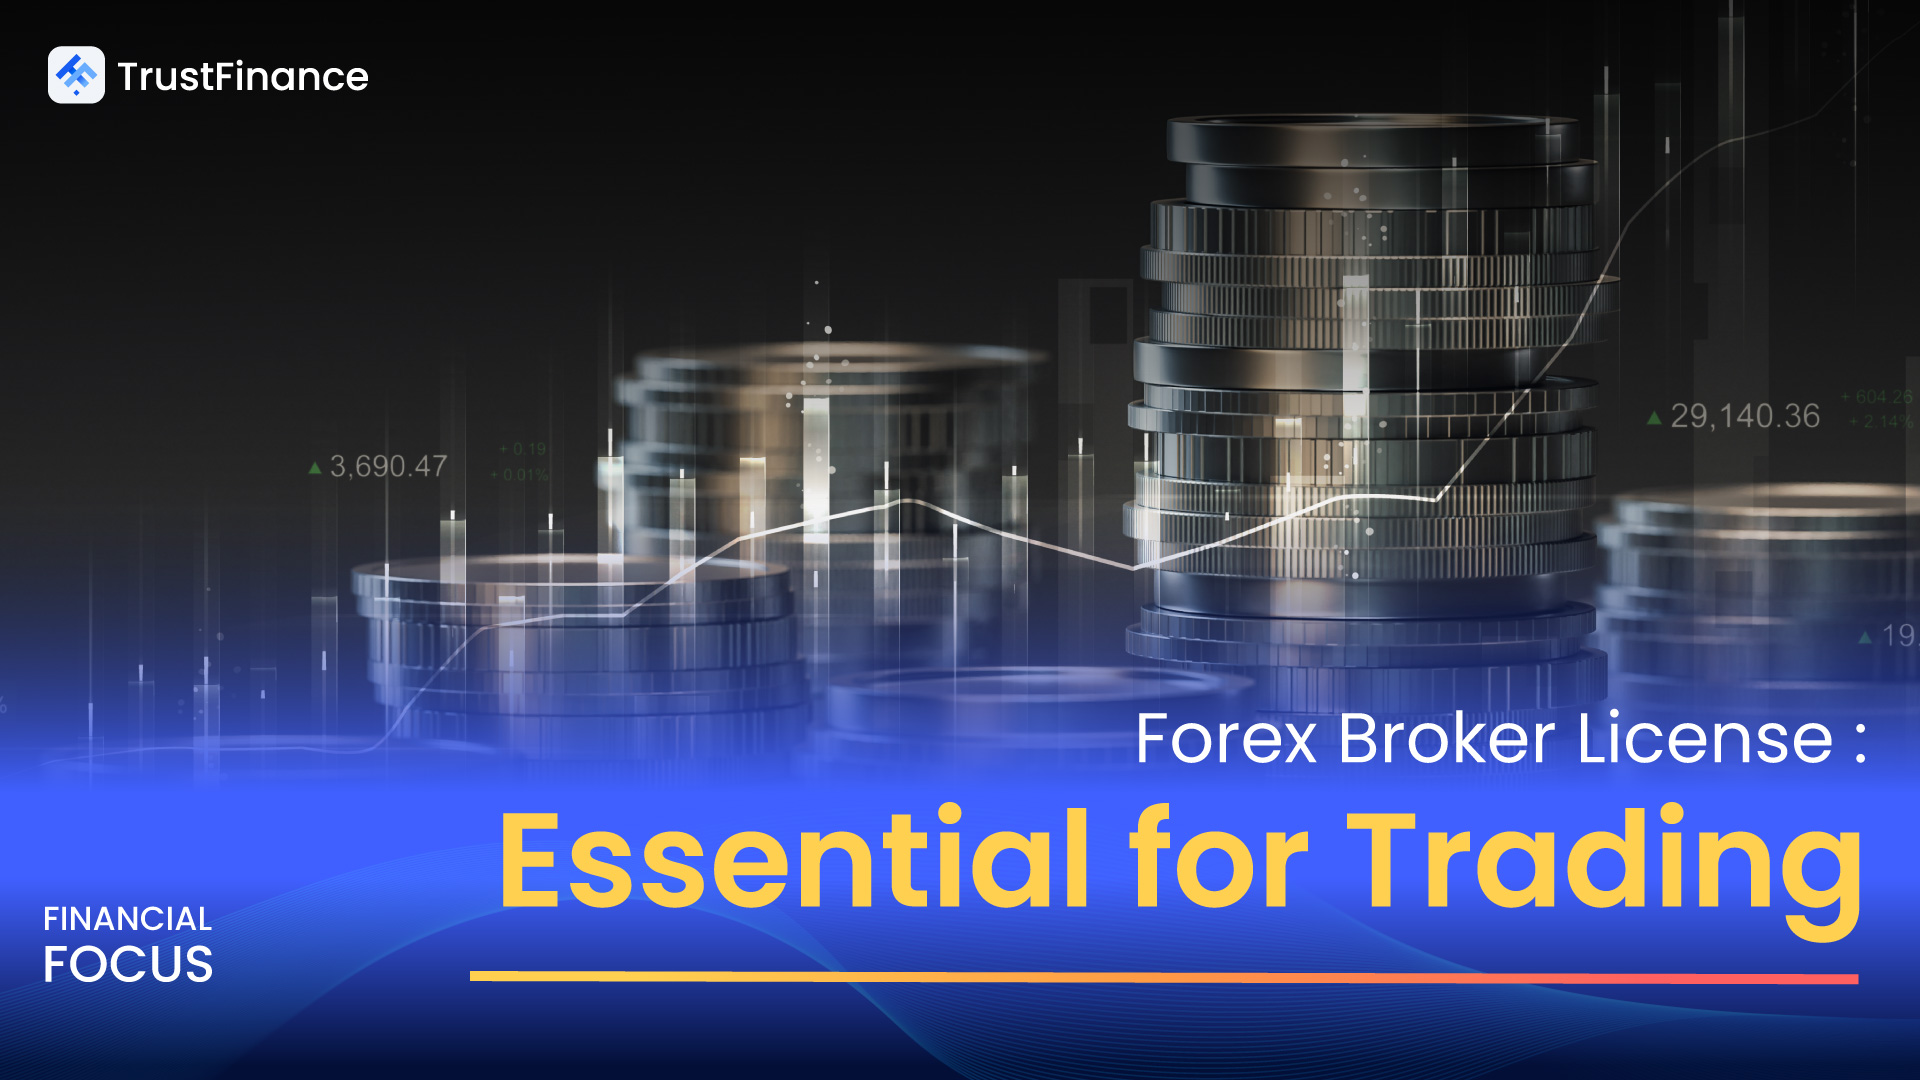 Forex Broker License: Essential for Trading